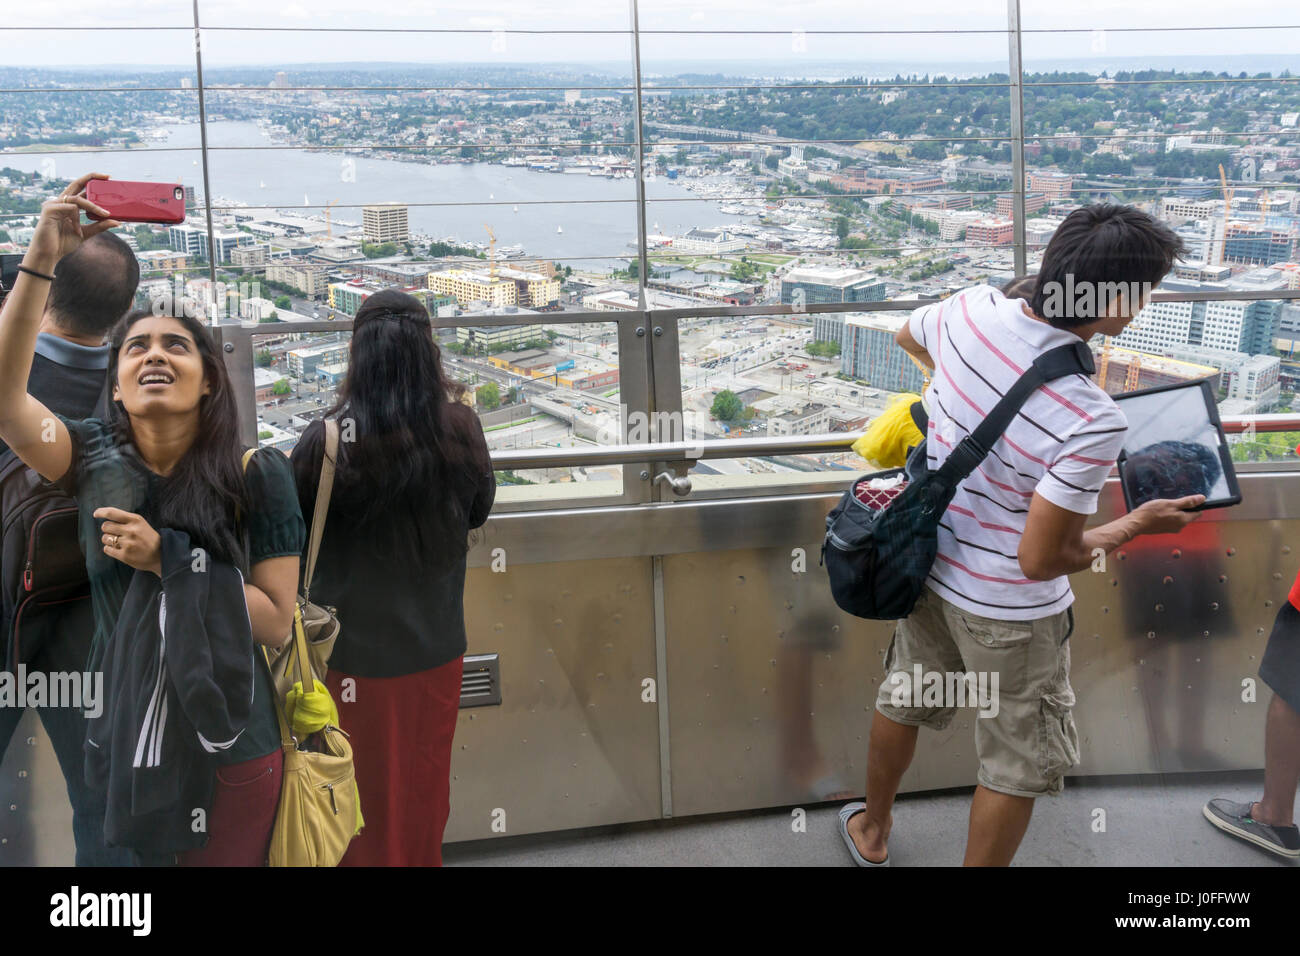 People taking photographs from the observation deck of the Space Needle in Seattle. Stock Photo